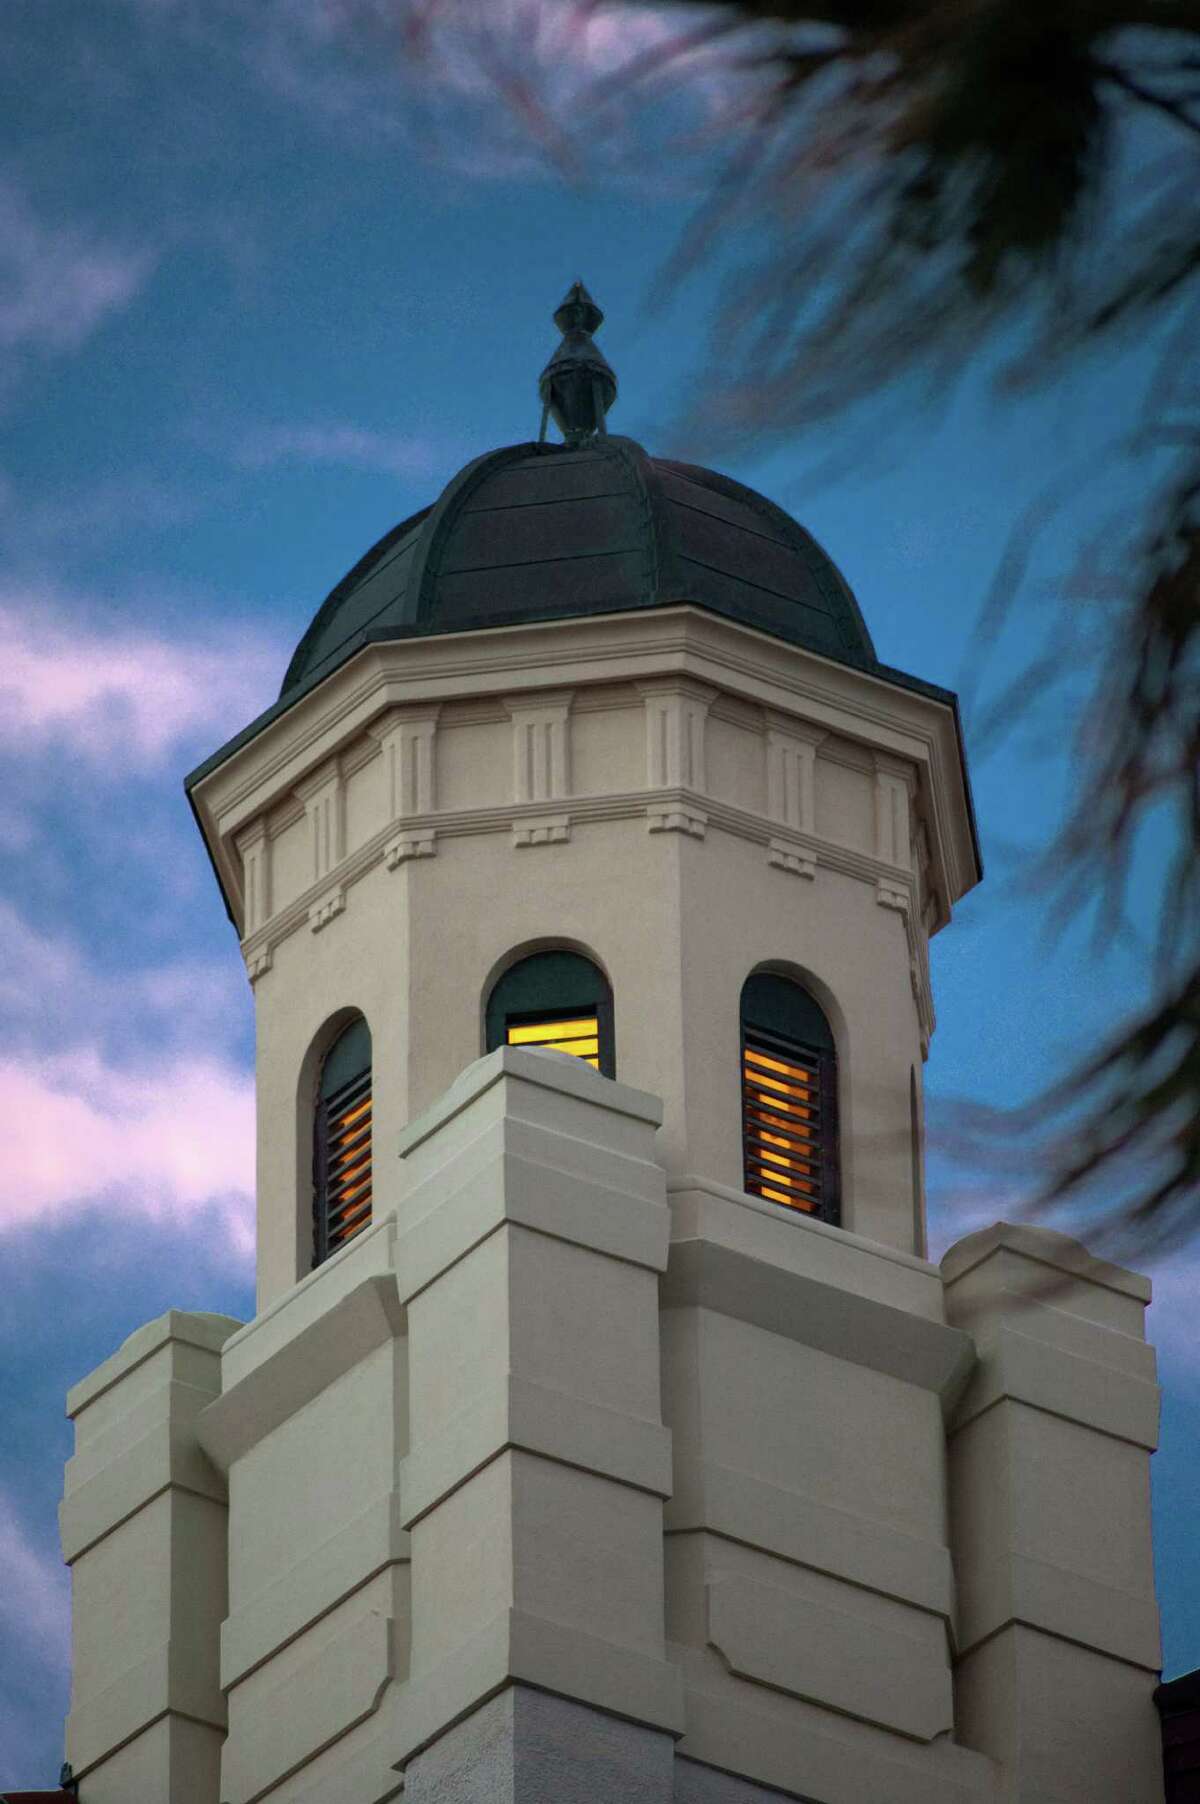 View of the haunted Southwest tower at the Hotel Galvez at dusk